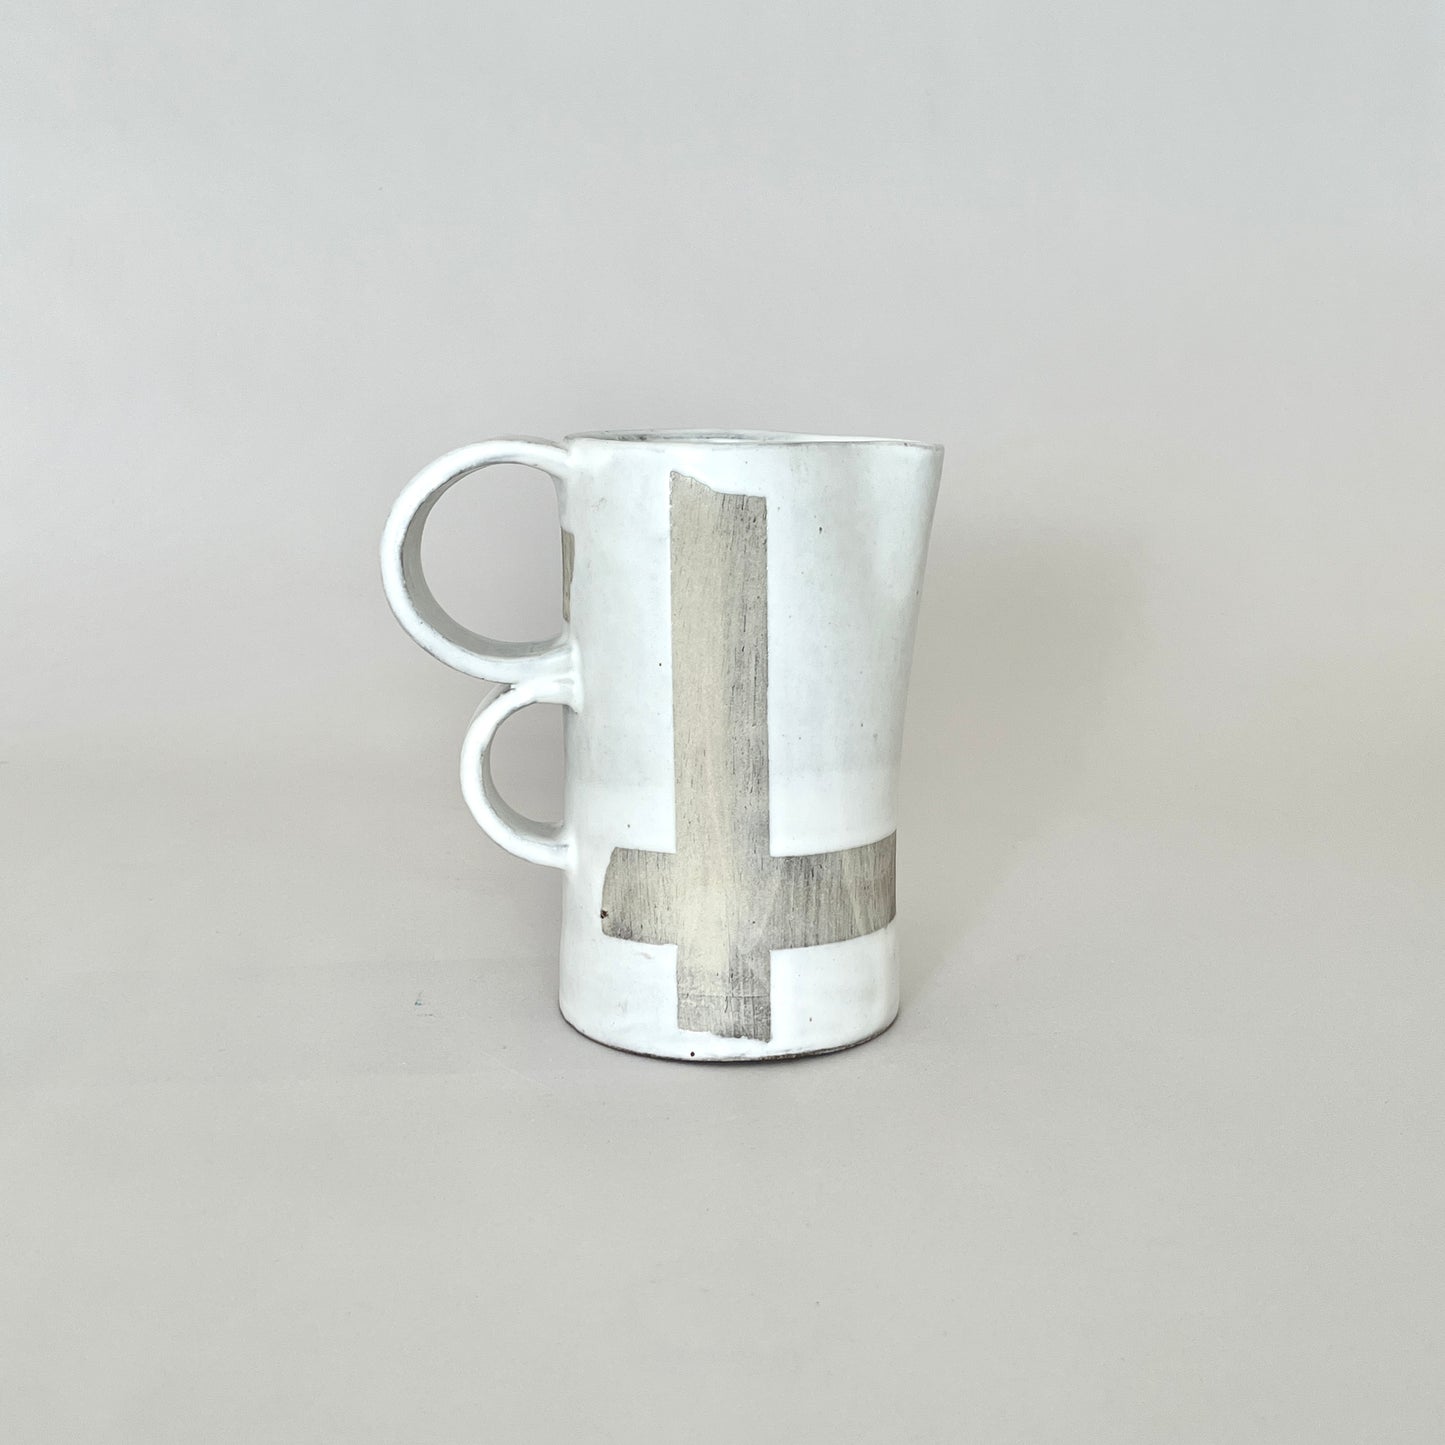 Painter Tape Pitcher, Small White No.2